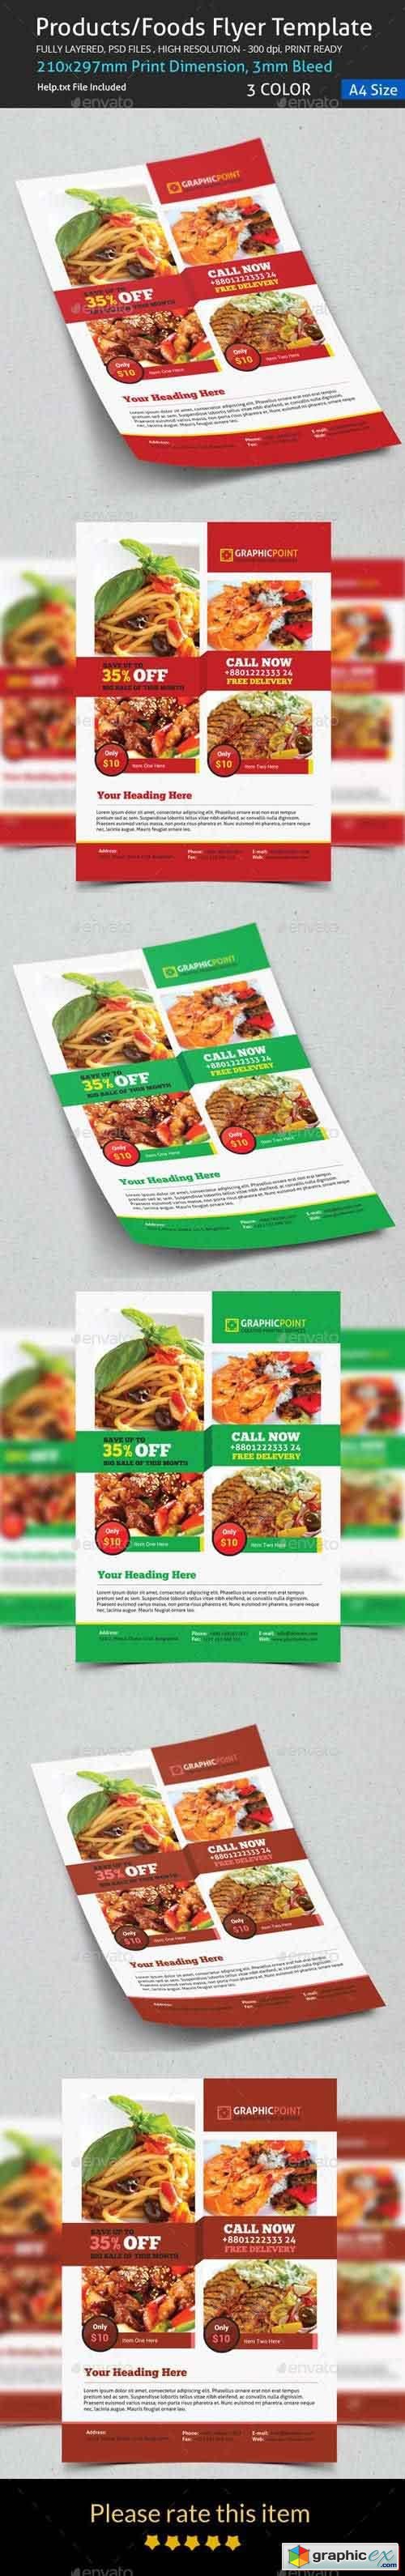 Products/Foods Flyer Template 